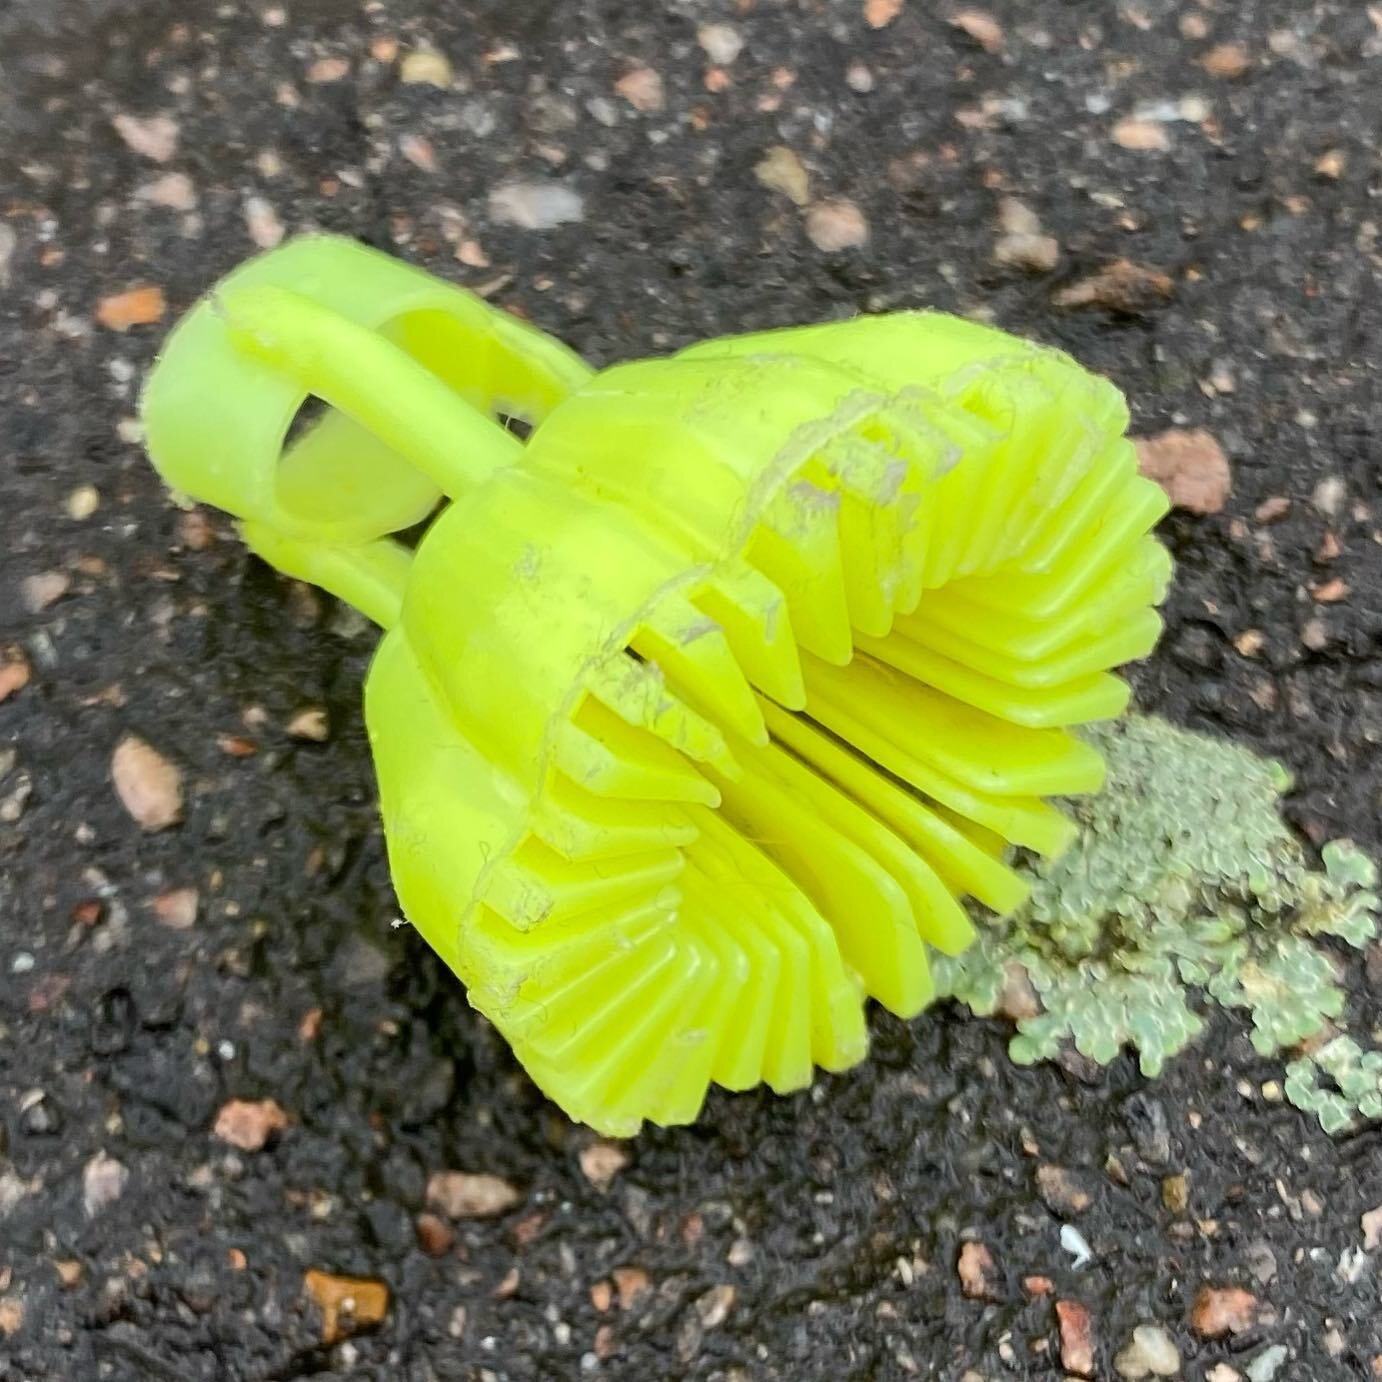 #plastic #foundobjects #found #archive #collection #street #pavement #plasticpollution #plasticpollutes #whatisit #shape